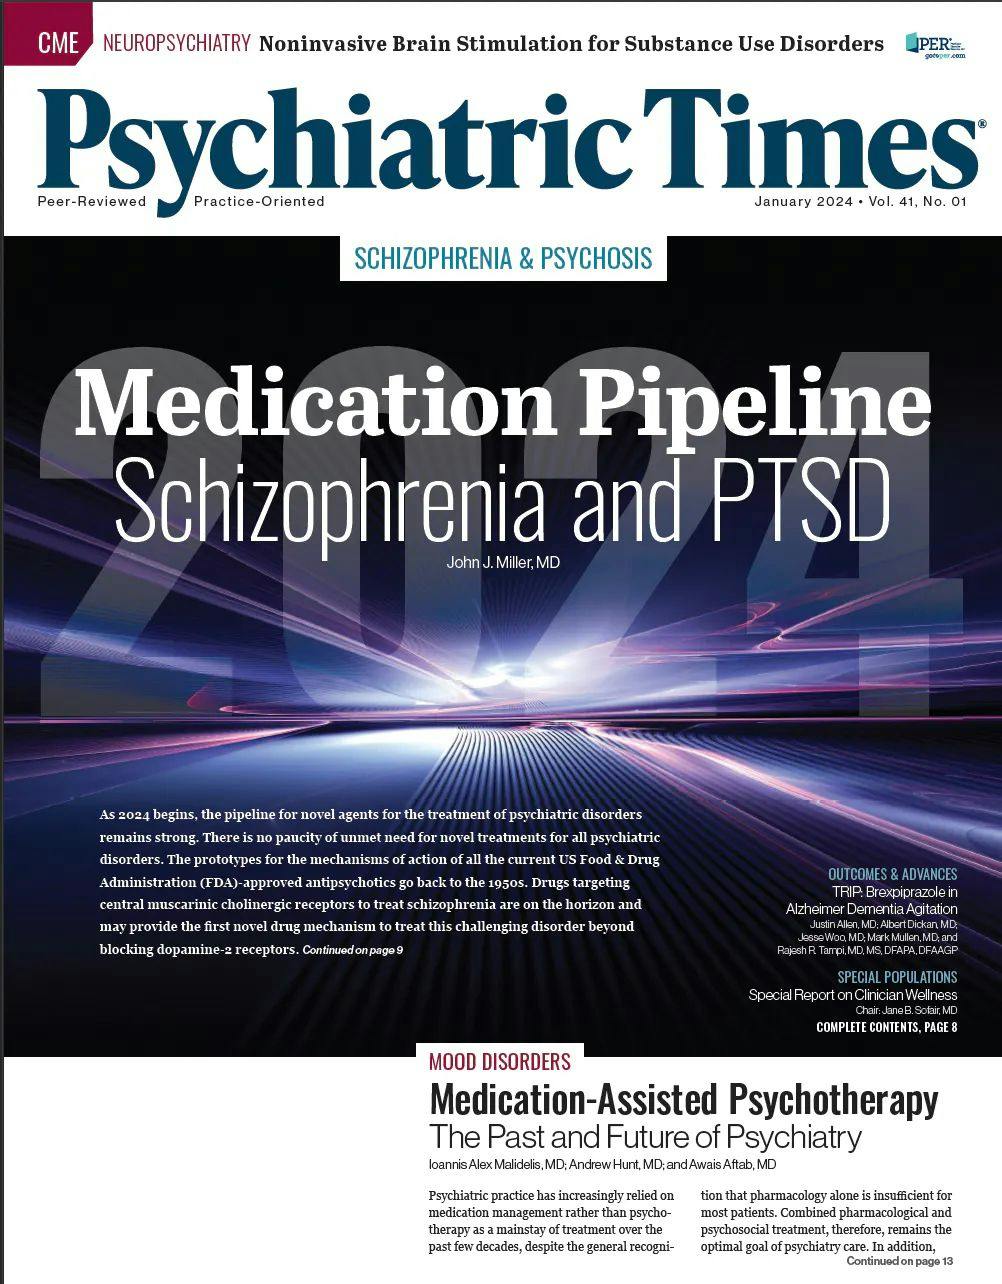 The experts weighed in on a wide variety of psychiatric issues for the January 2024 issue of Psychiatric Times.